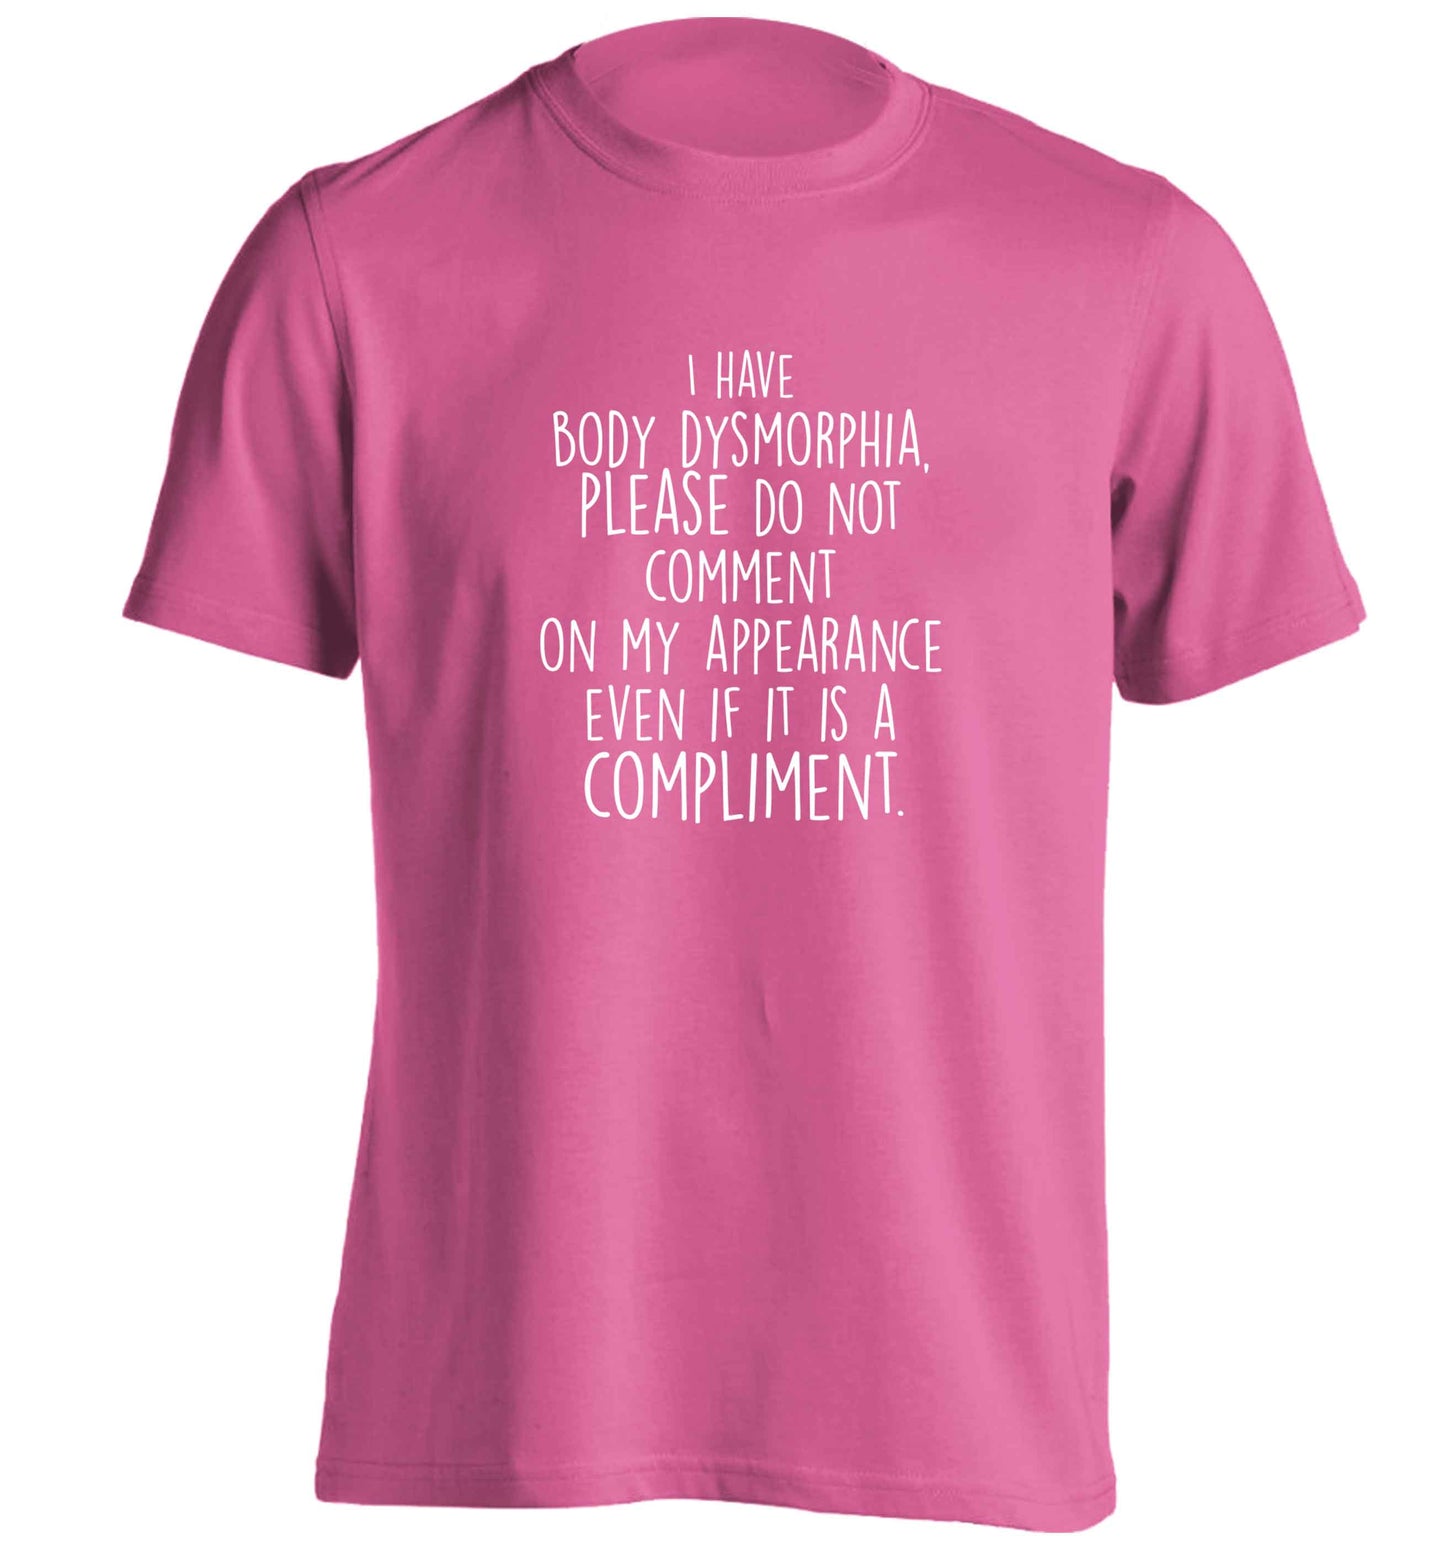 I have body dysmorphia, please do not comment on my appearance even if it is a compliment adults unisex pink Tshirt 2XL